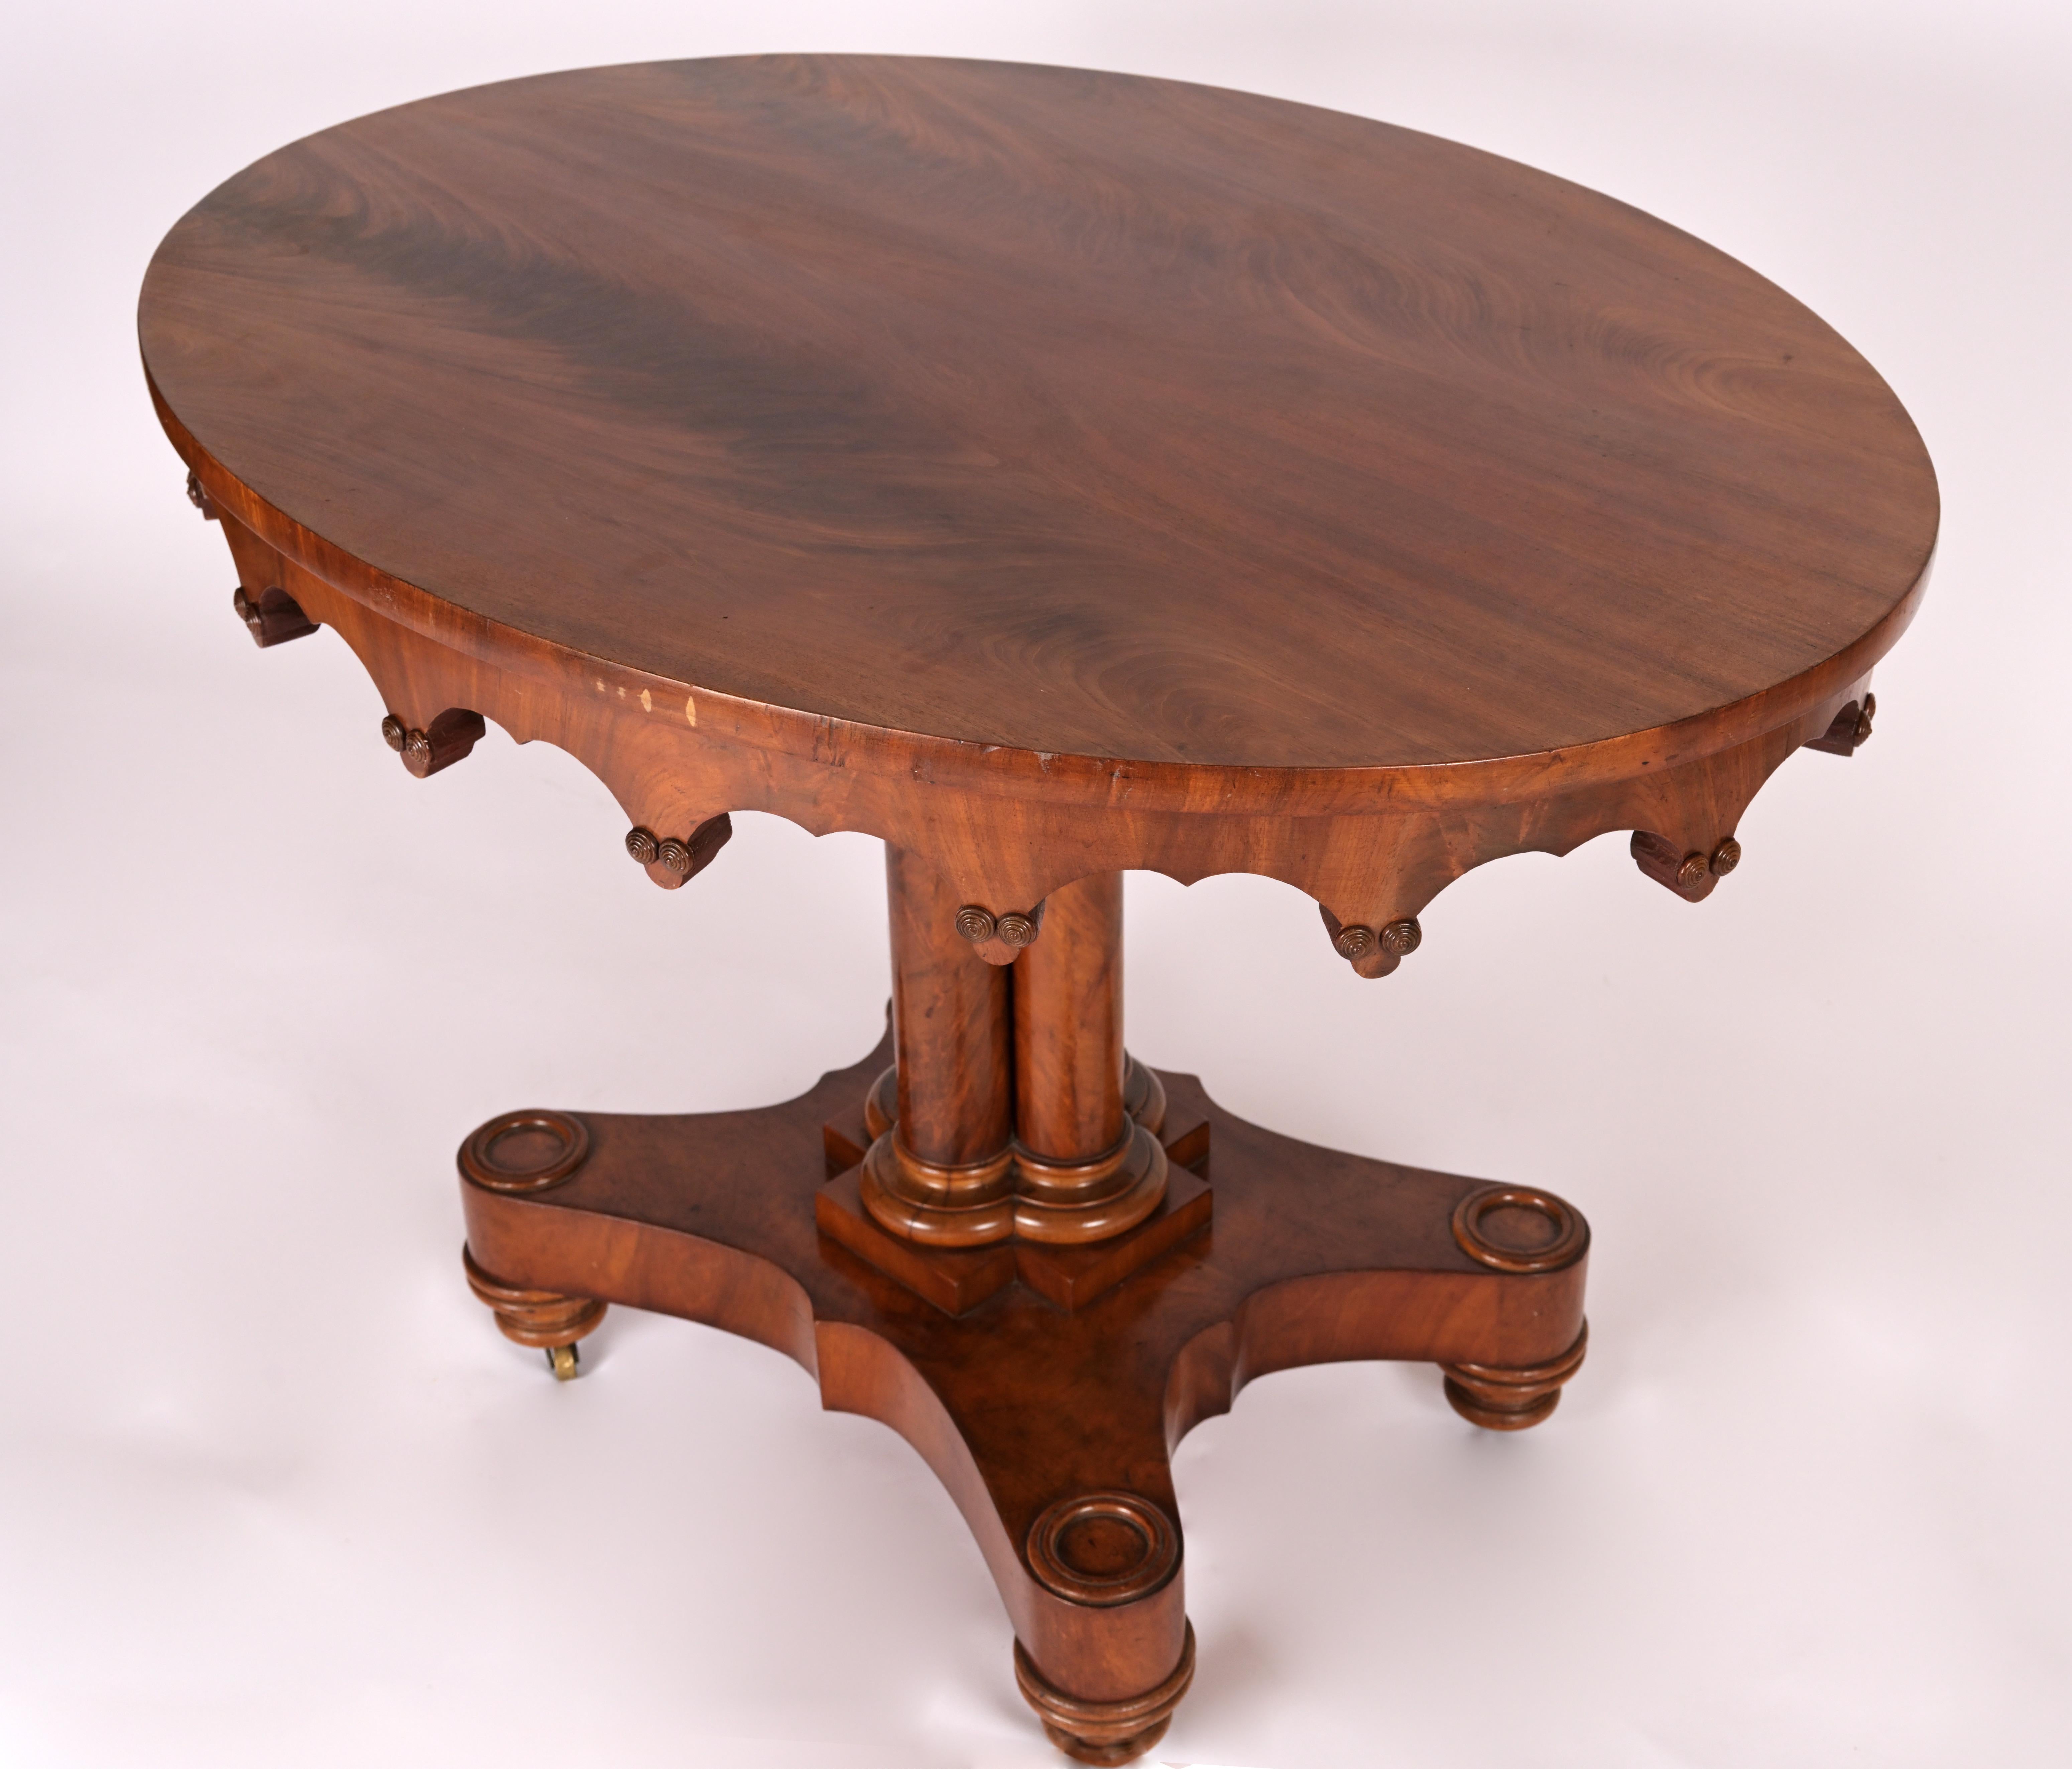 Gothic Revival Late 19th Century Neo-Gothic Mahogany Table For Sale